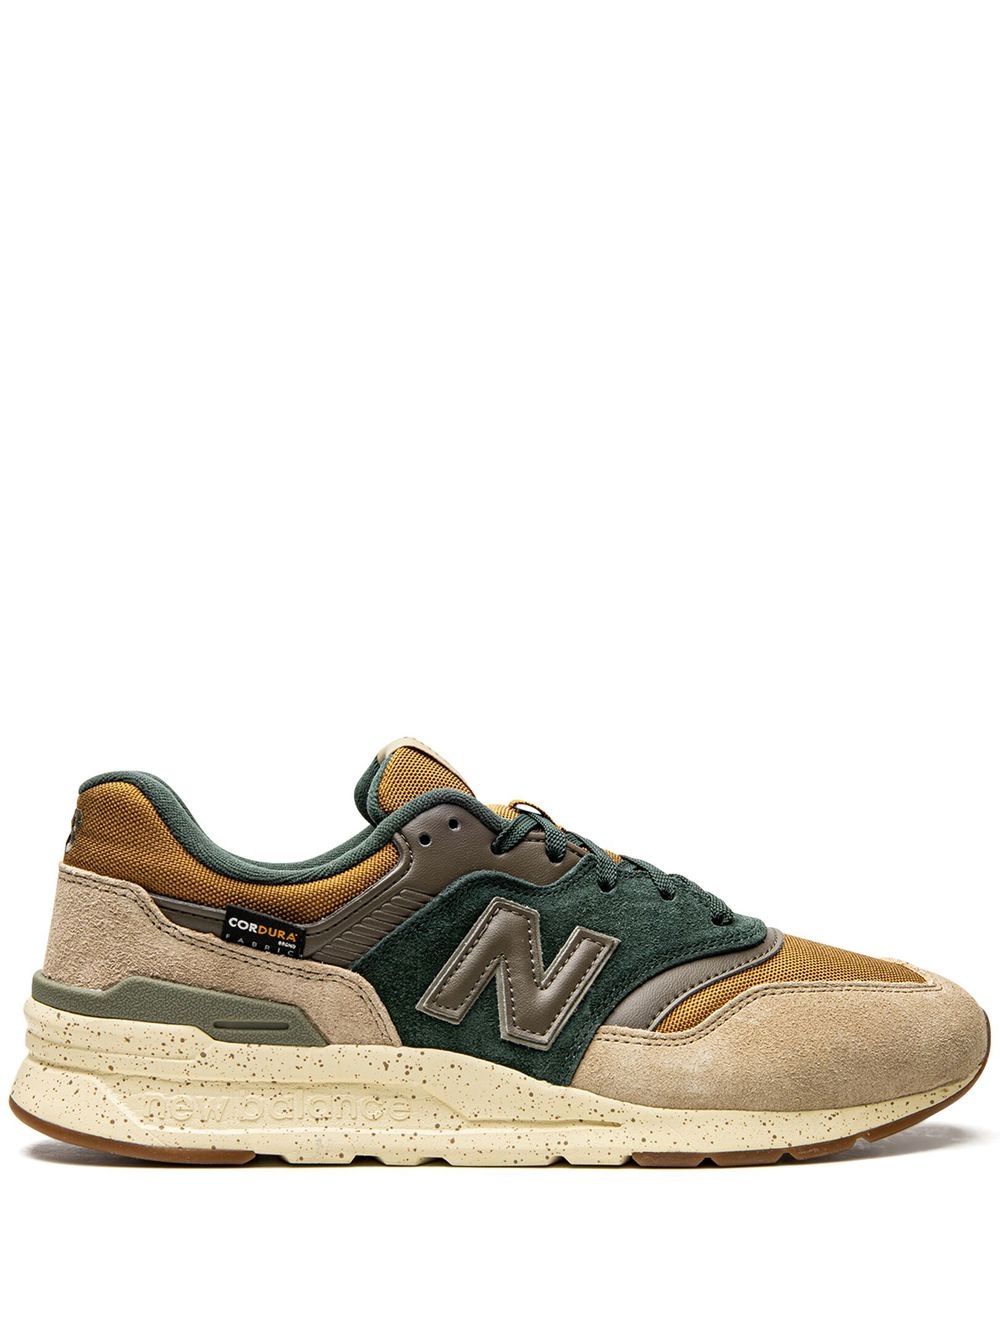 New Balance 997 "Forest" sneakers - Green